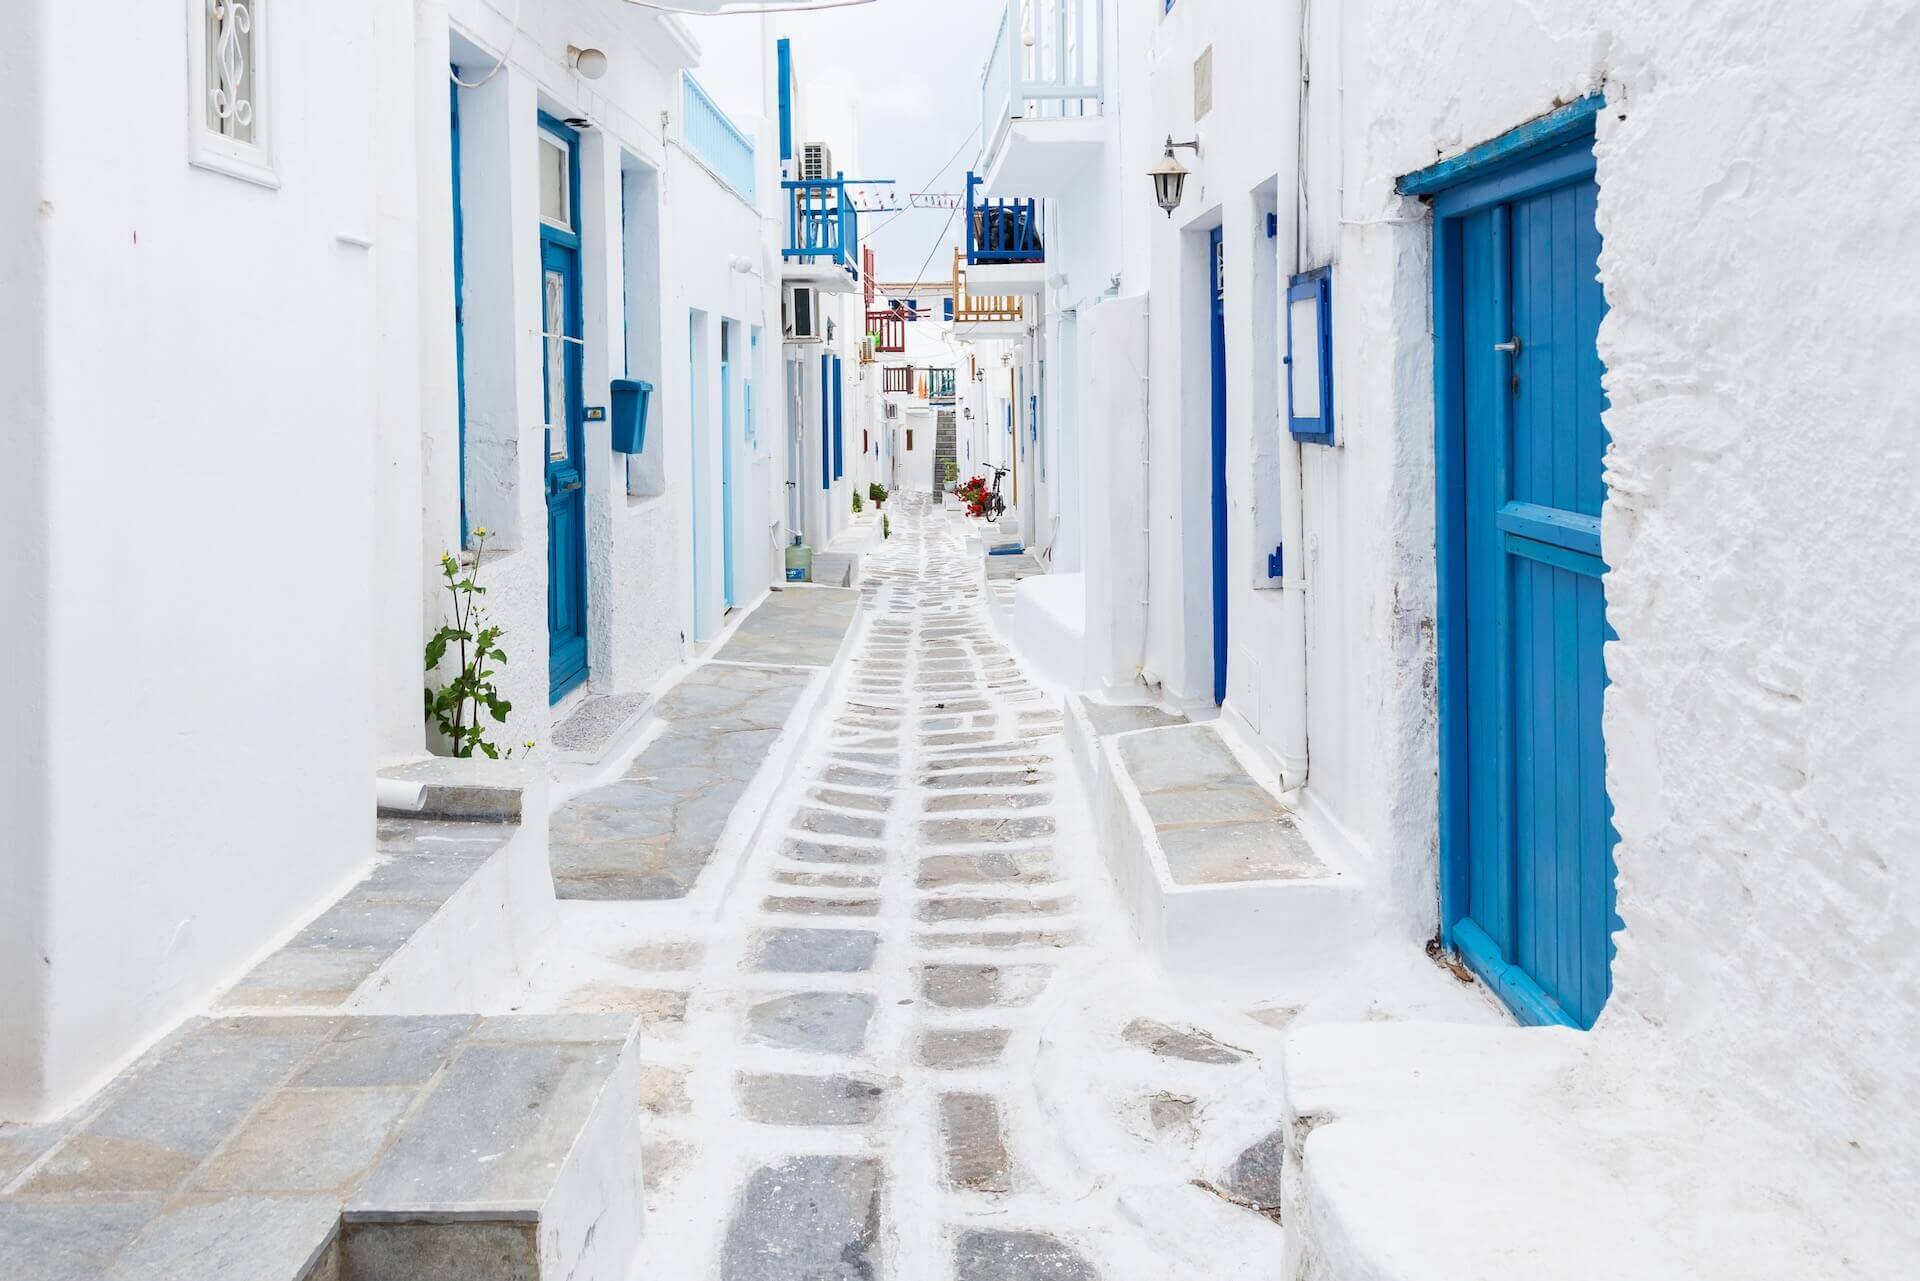 The view of the street in Chora, Mykonos